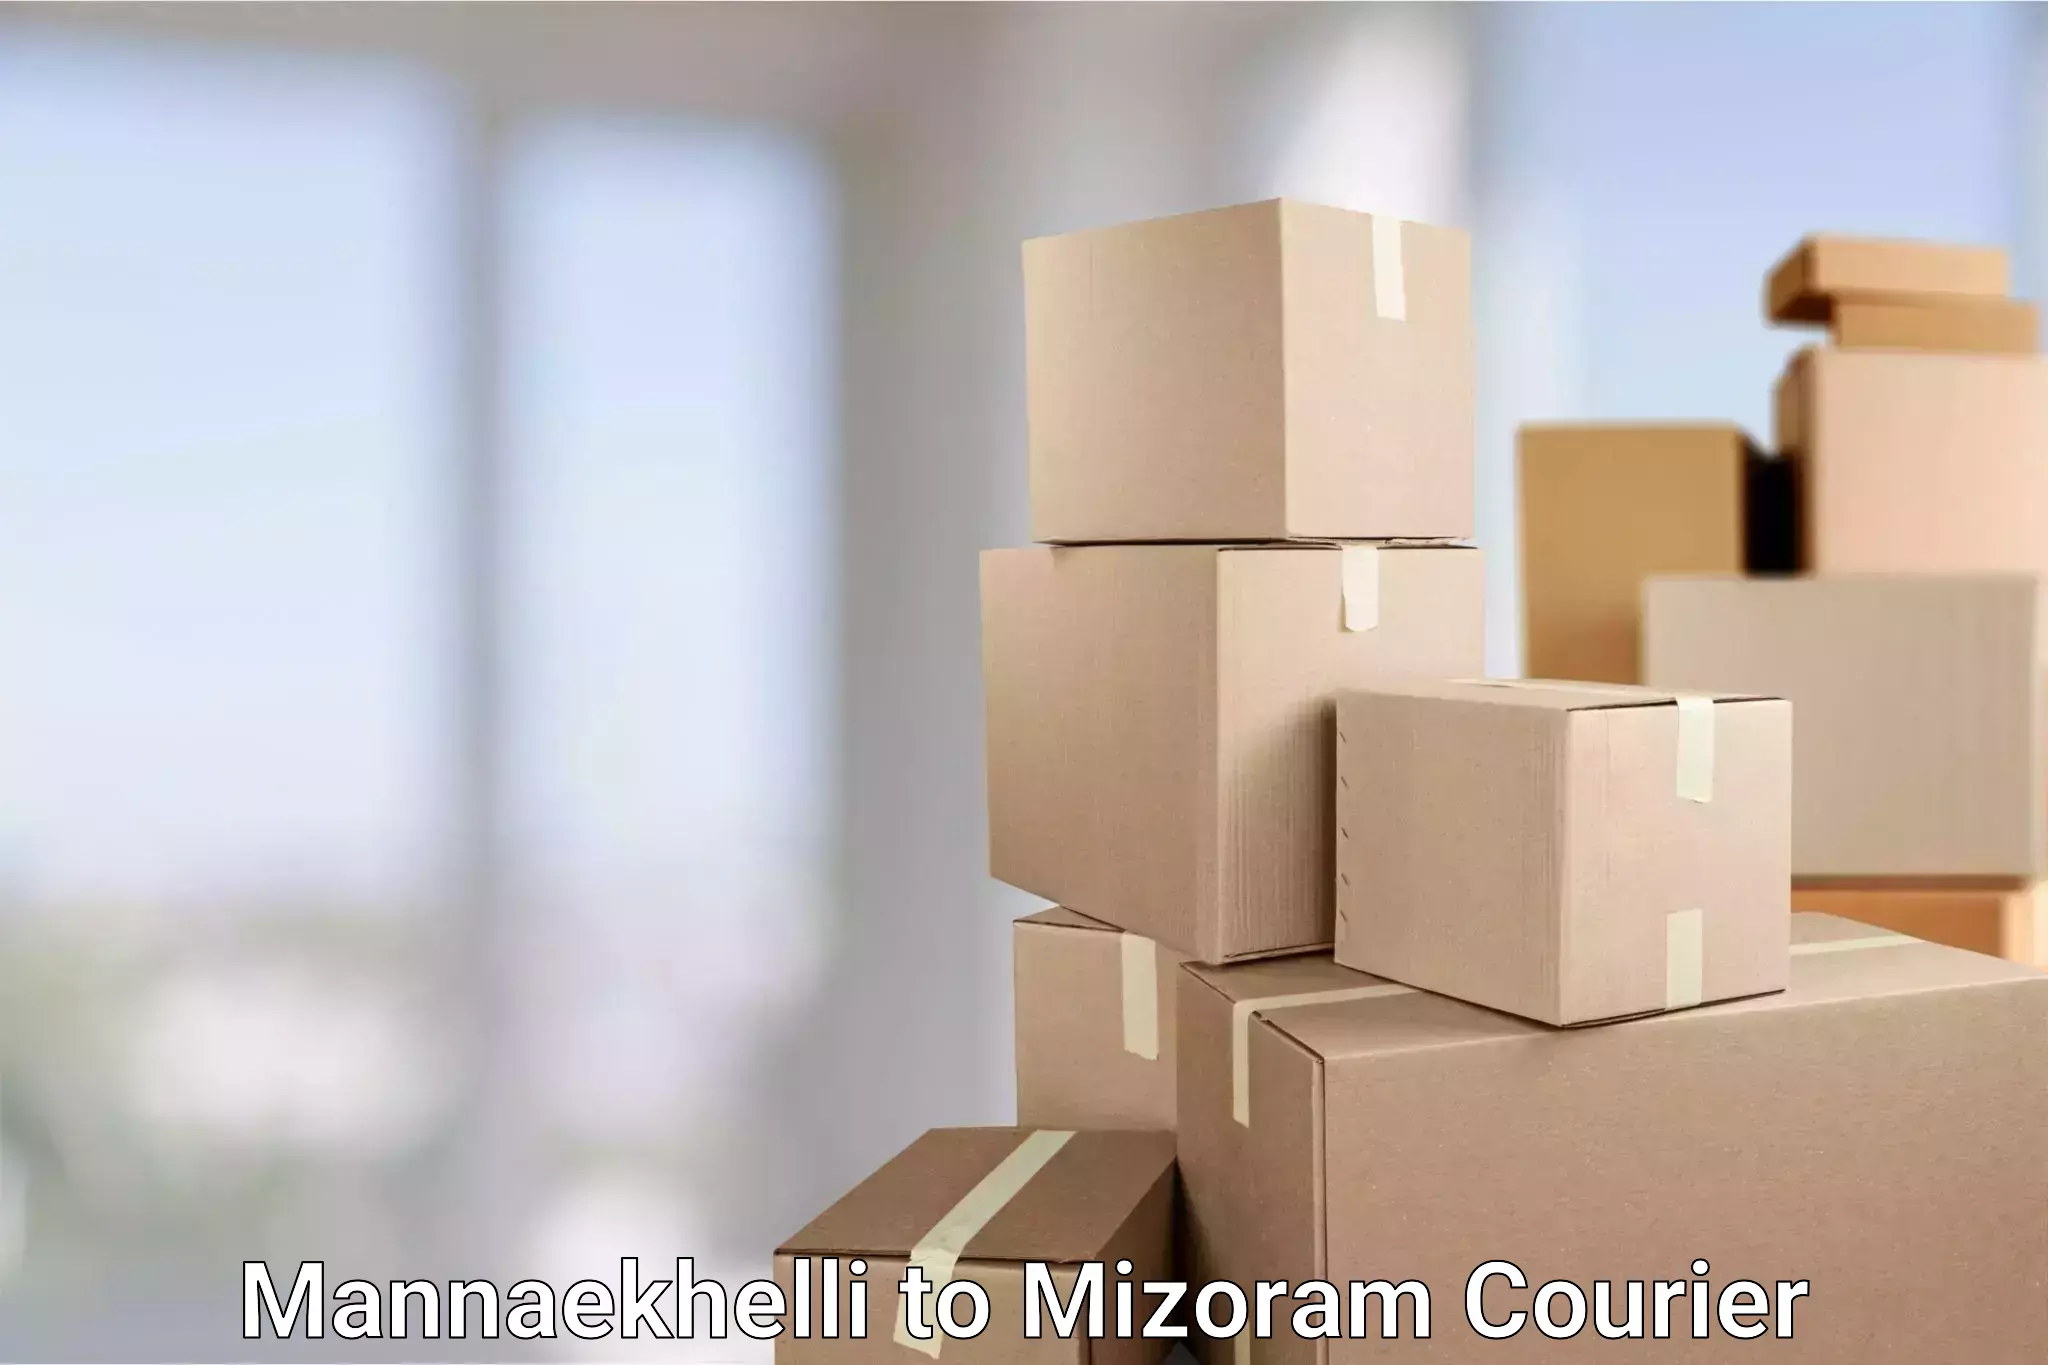 Corporate courier solutions Mannaekhelli to Darlawn